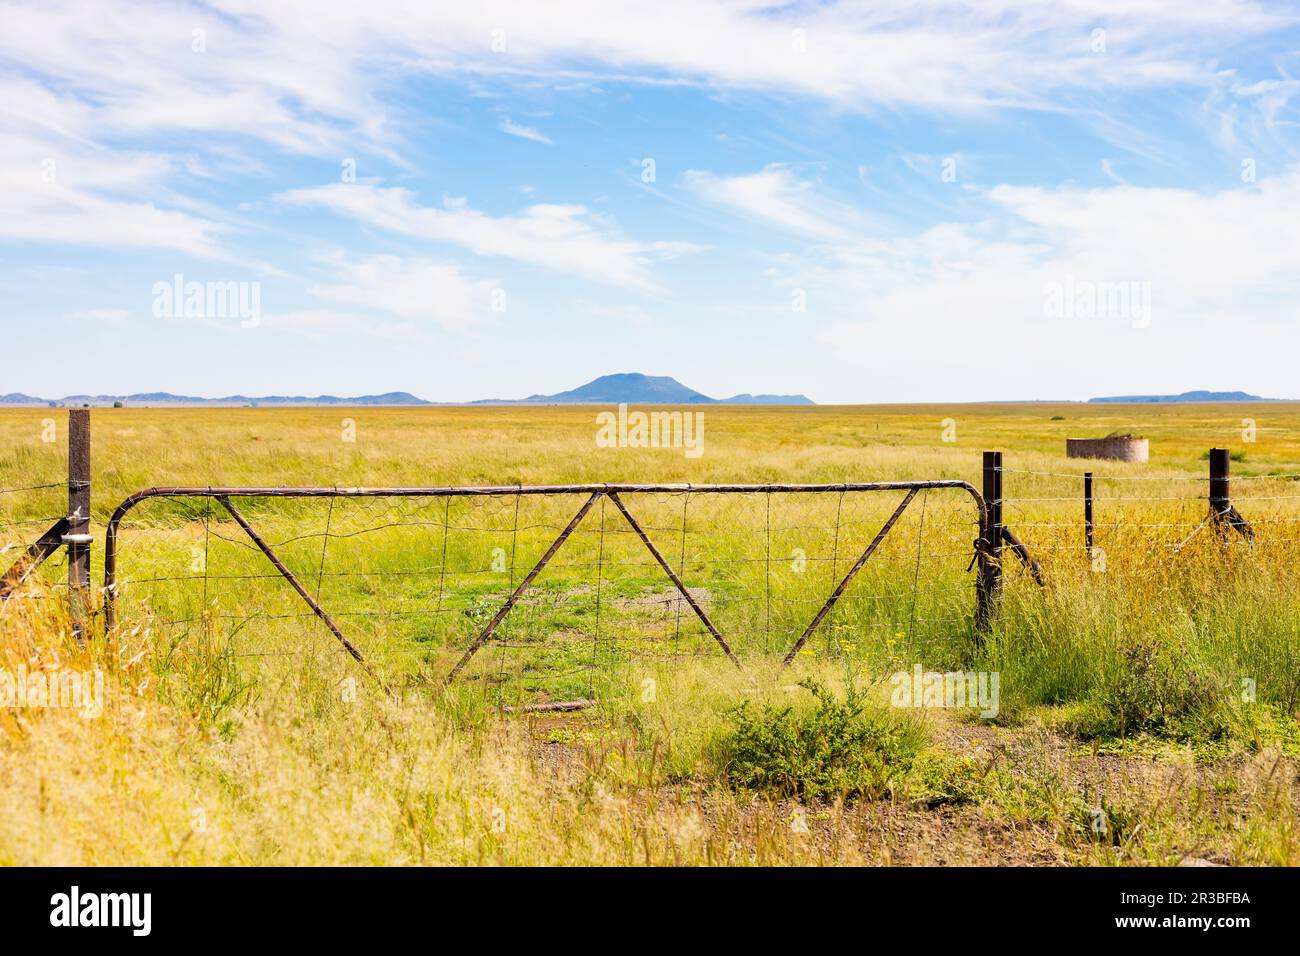 Farm gate and fence in ruralarea of South Africa Stock Photo